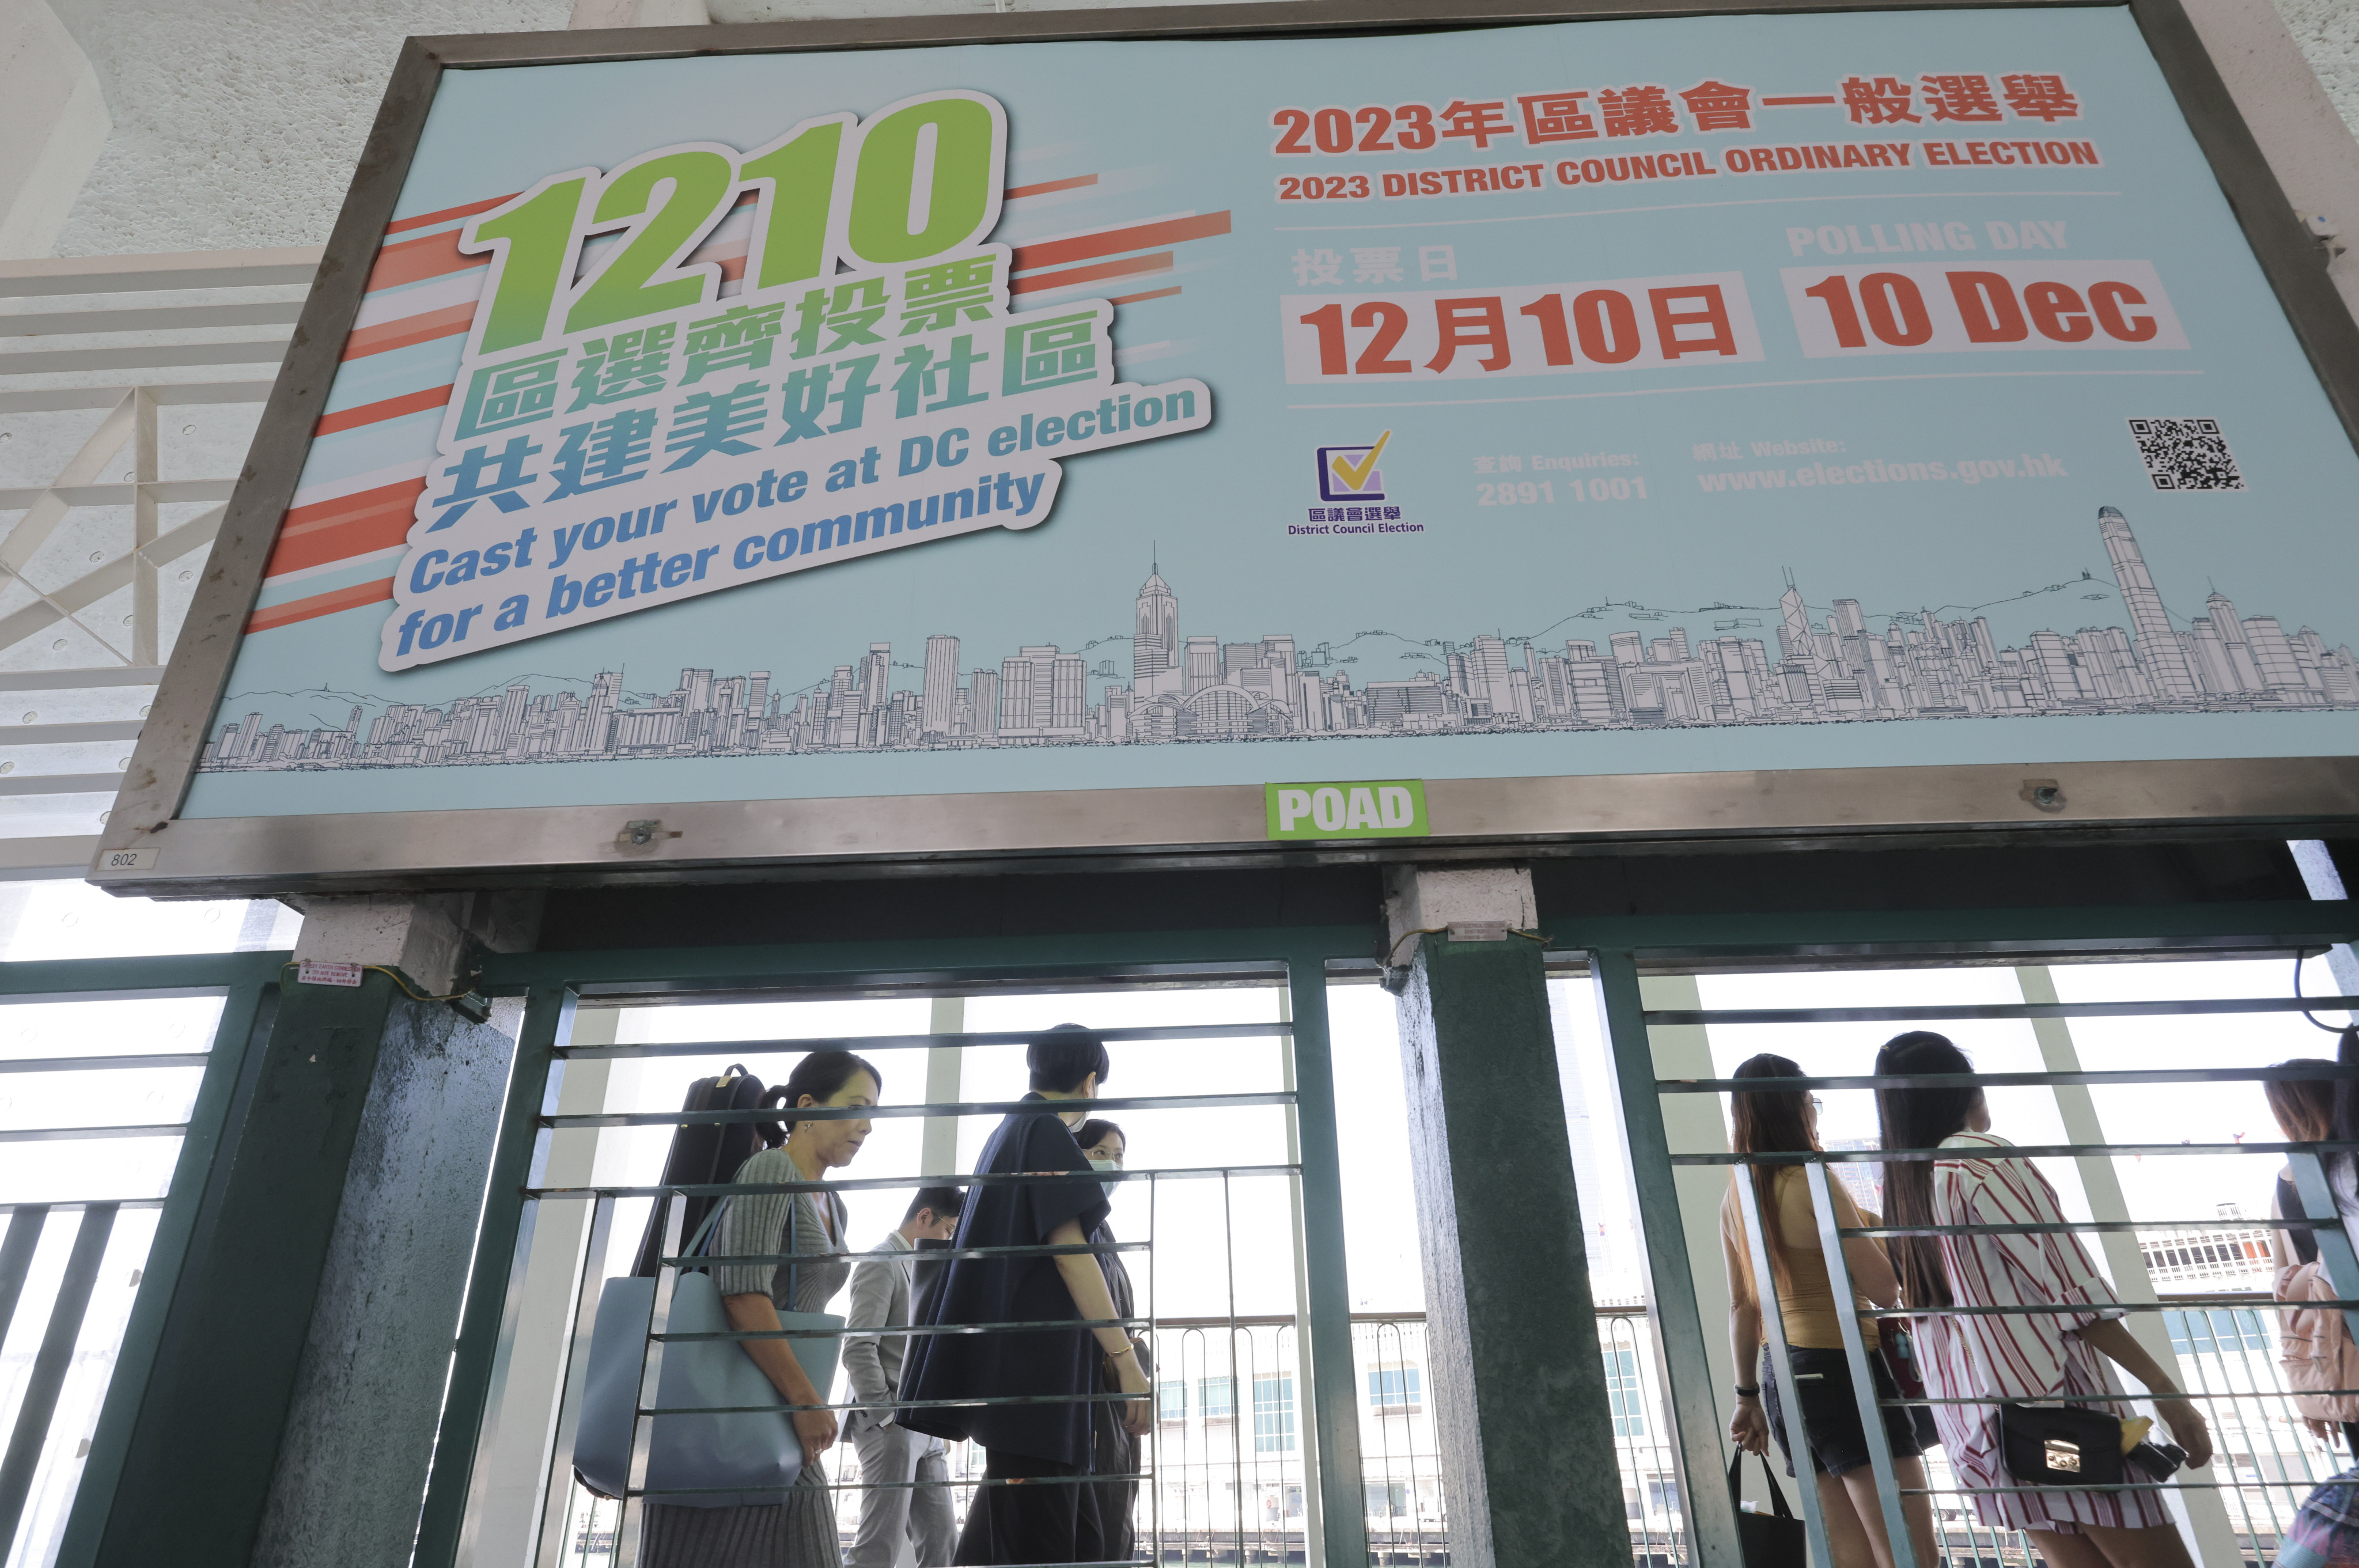 The district council election will be held on December 10. Photo: Jelly Tse